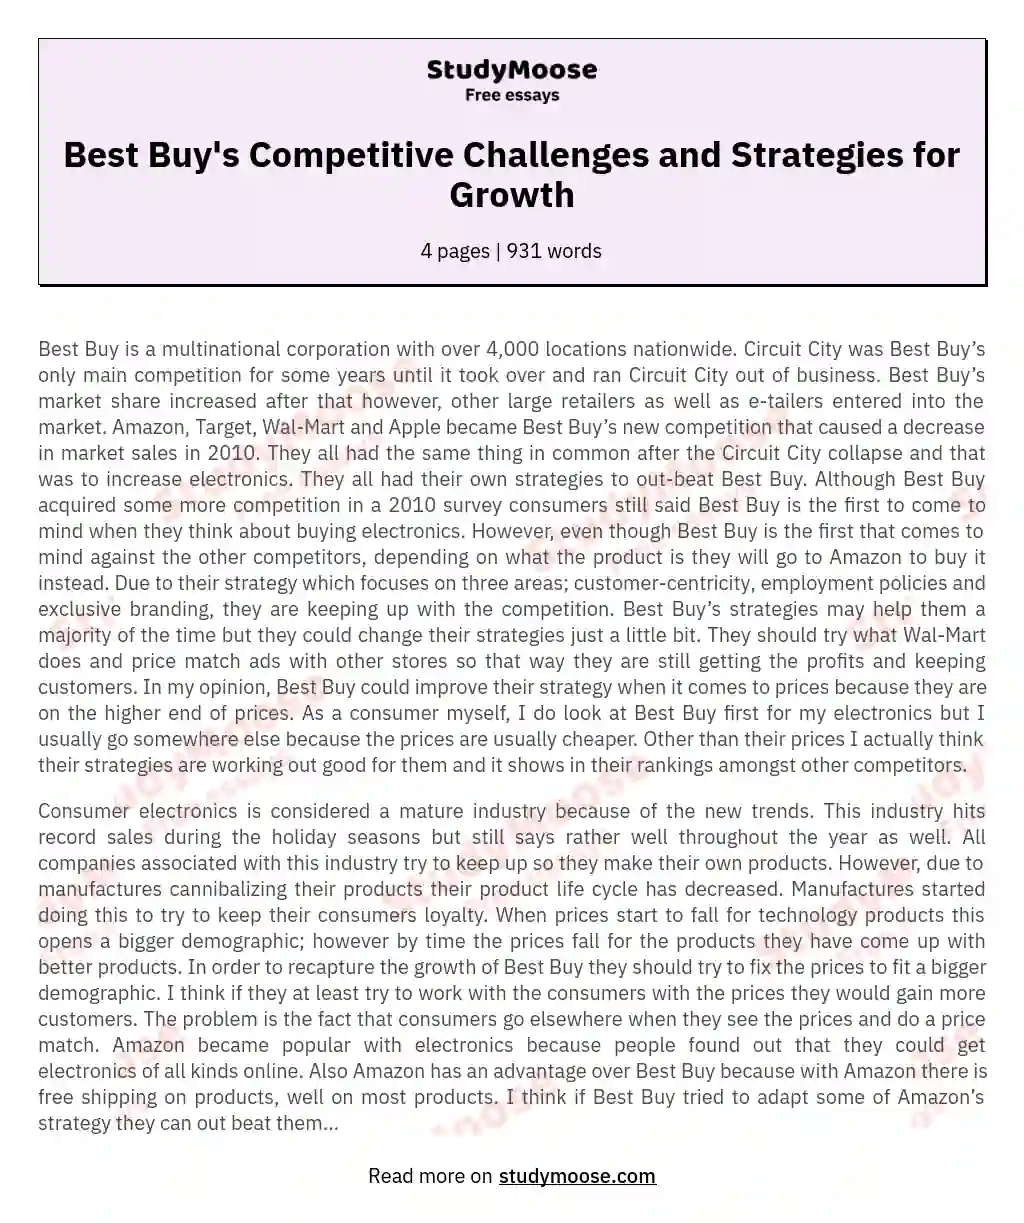 Best Buy's Competitive Challenges and Strategies for Growth essay